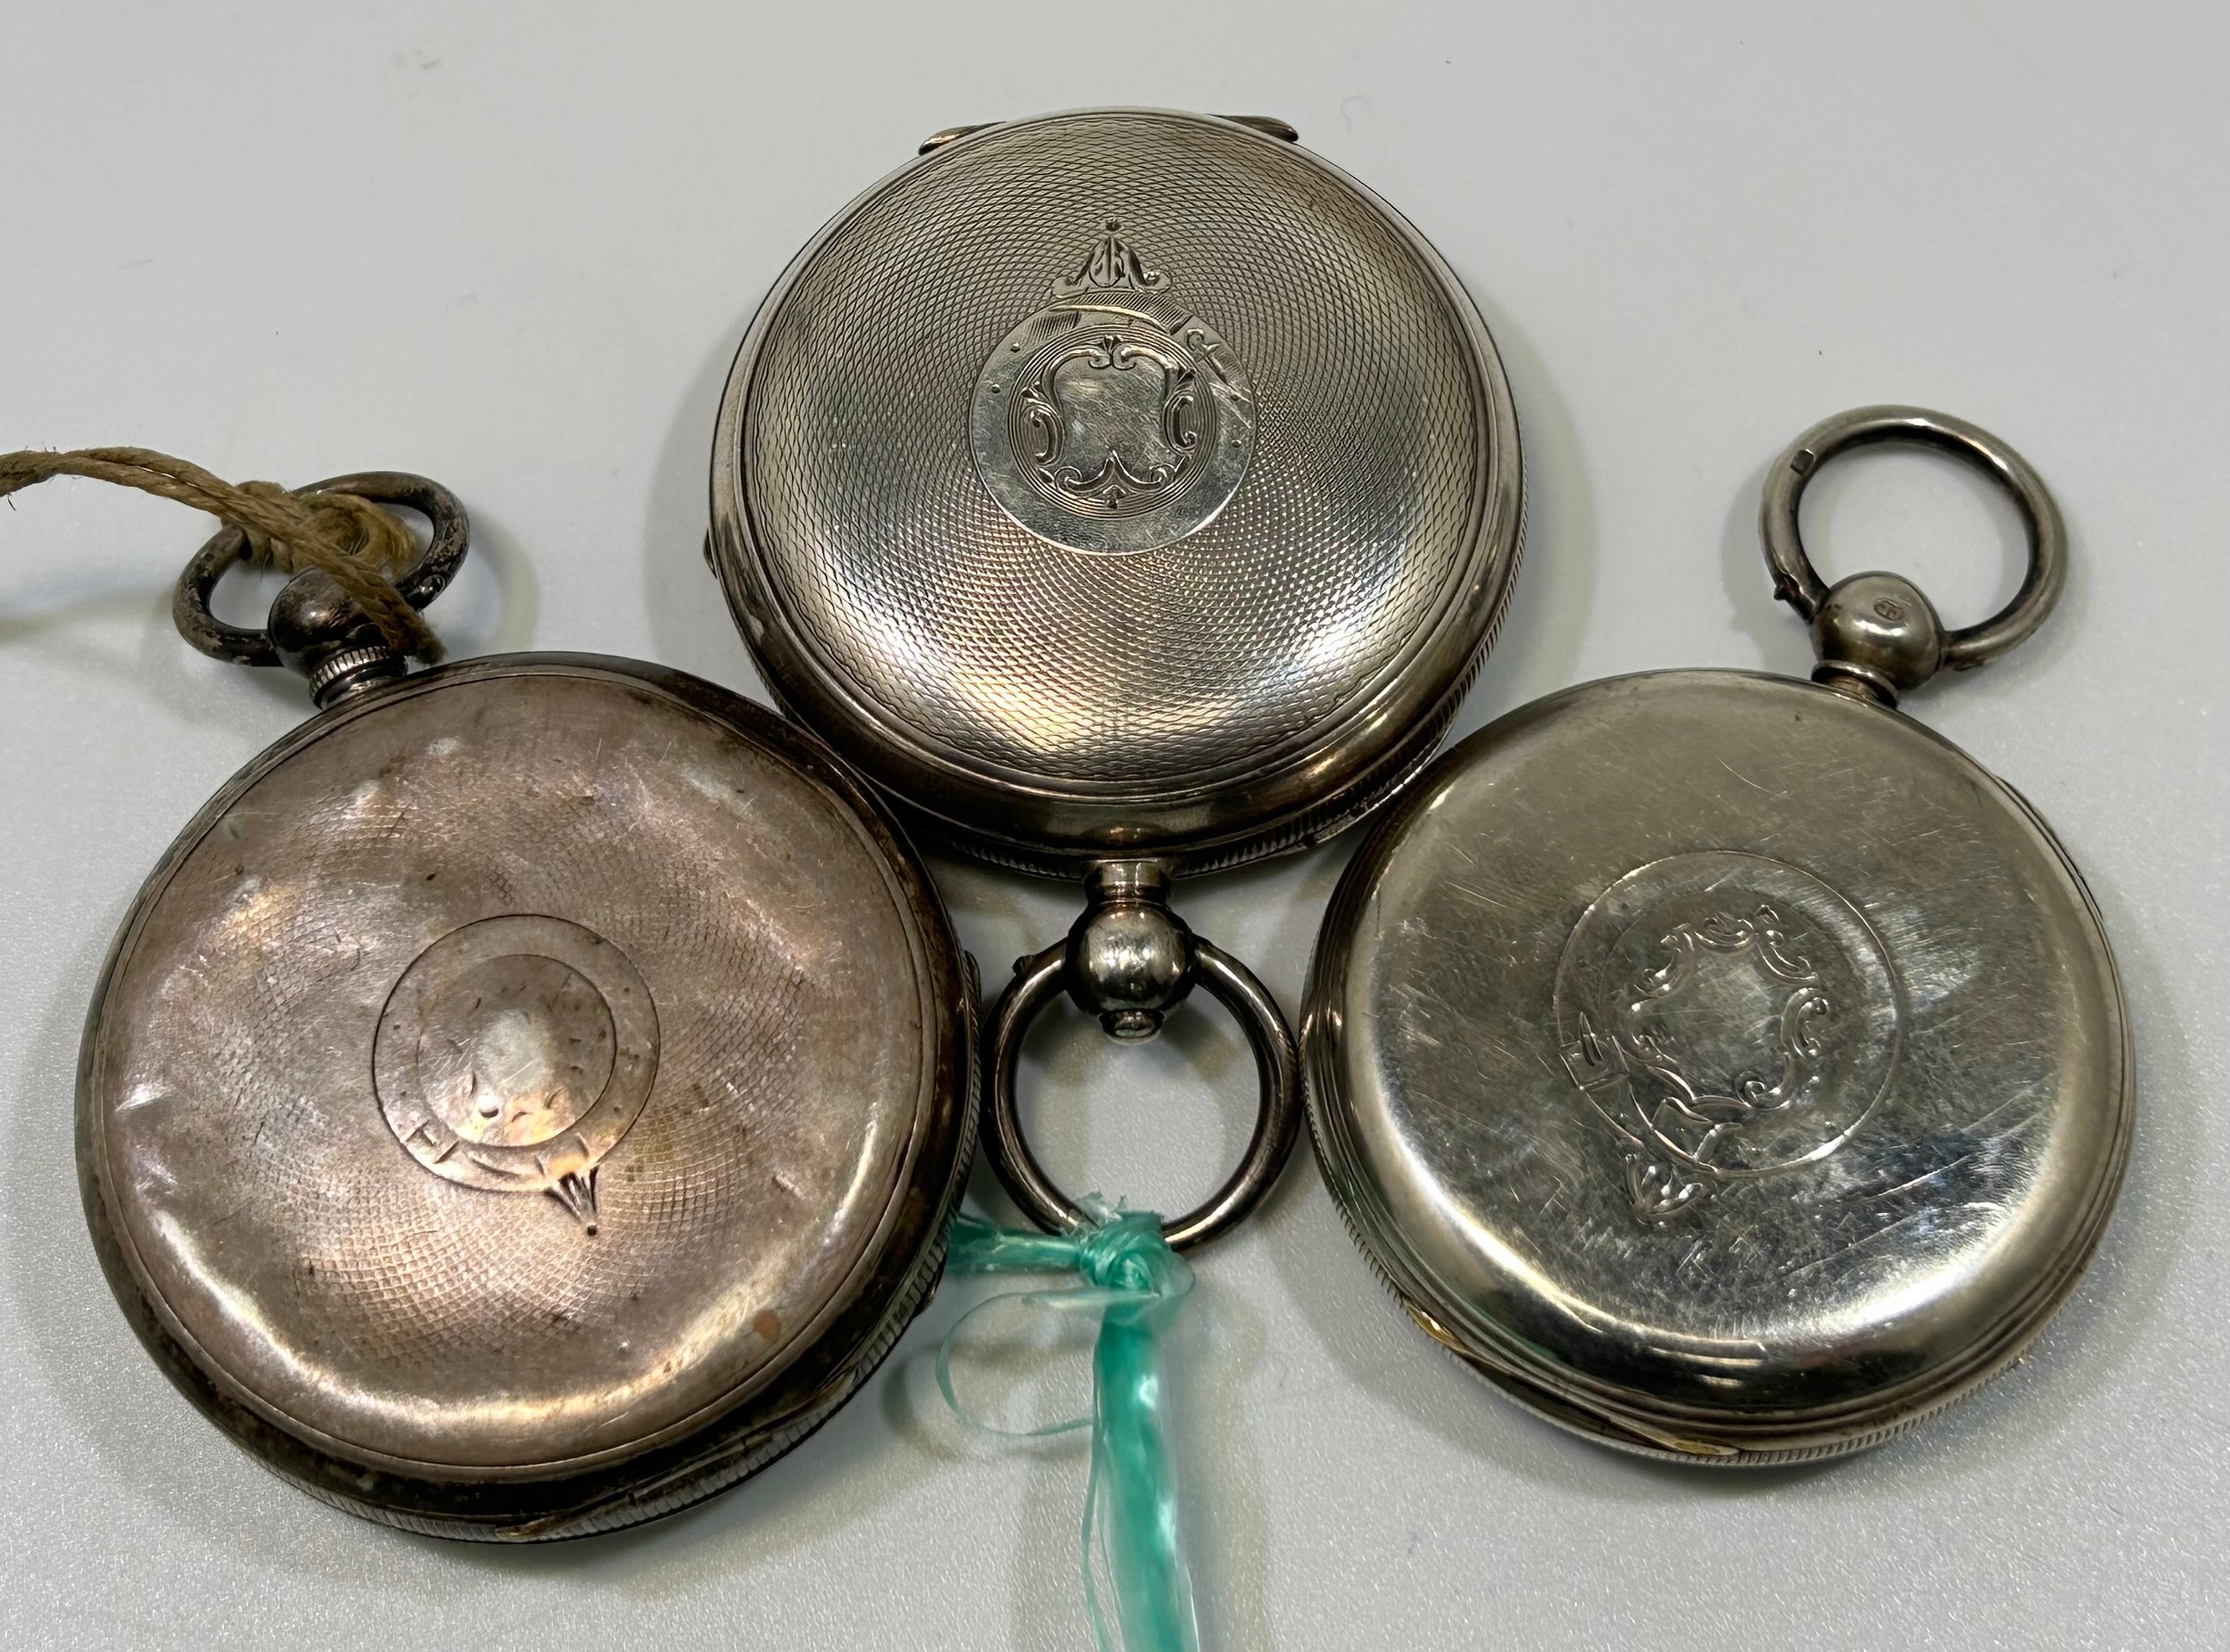 Three various silver-cased open face pocket watches, all with white enamel dials, Roman numerals - Image 2 of 5